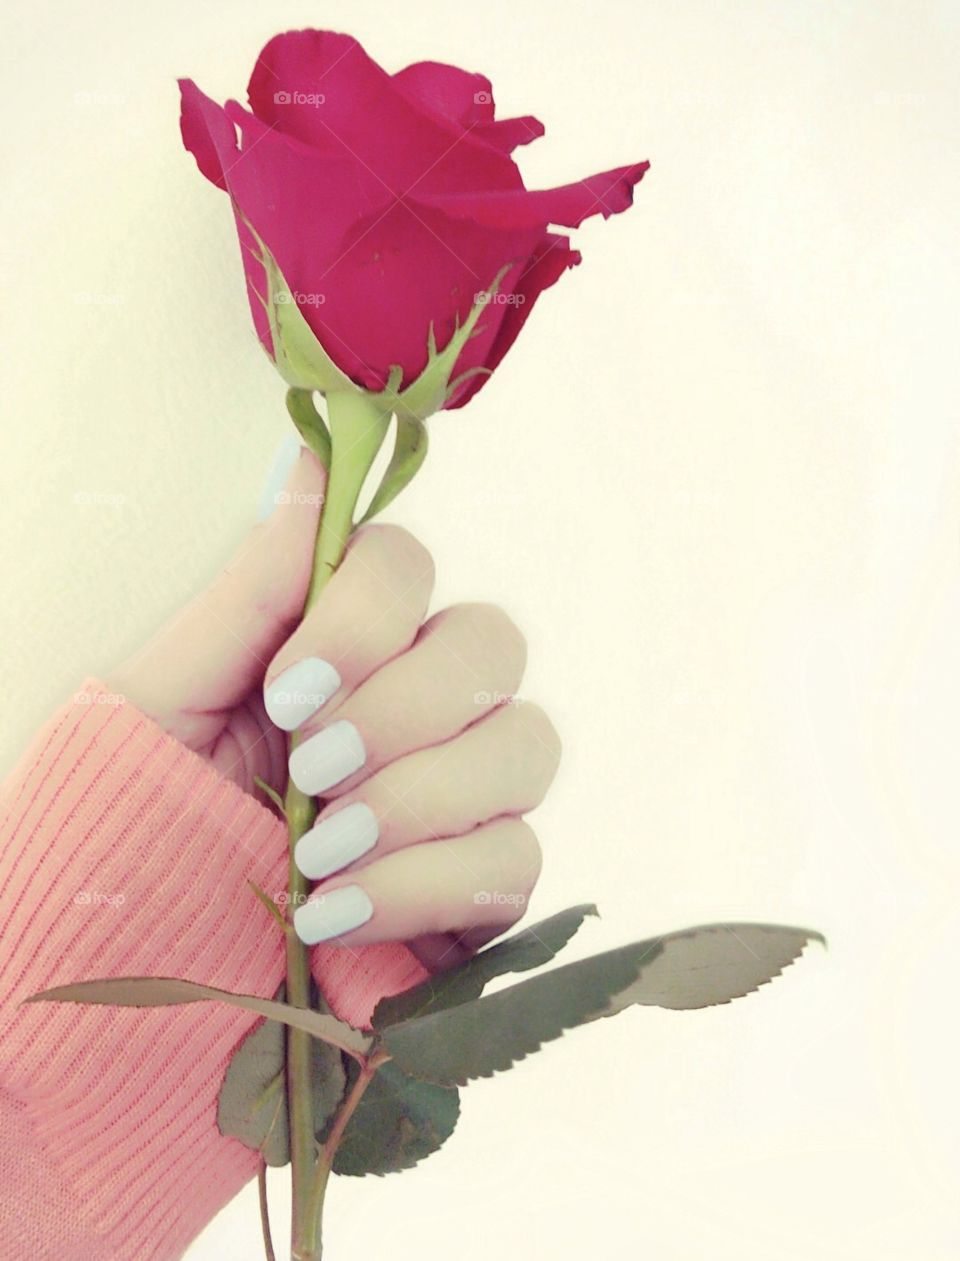 Woman's Hand Holding Red Rose